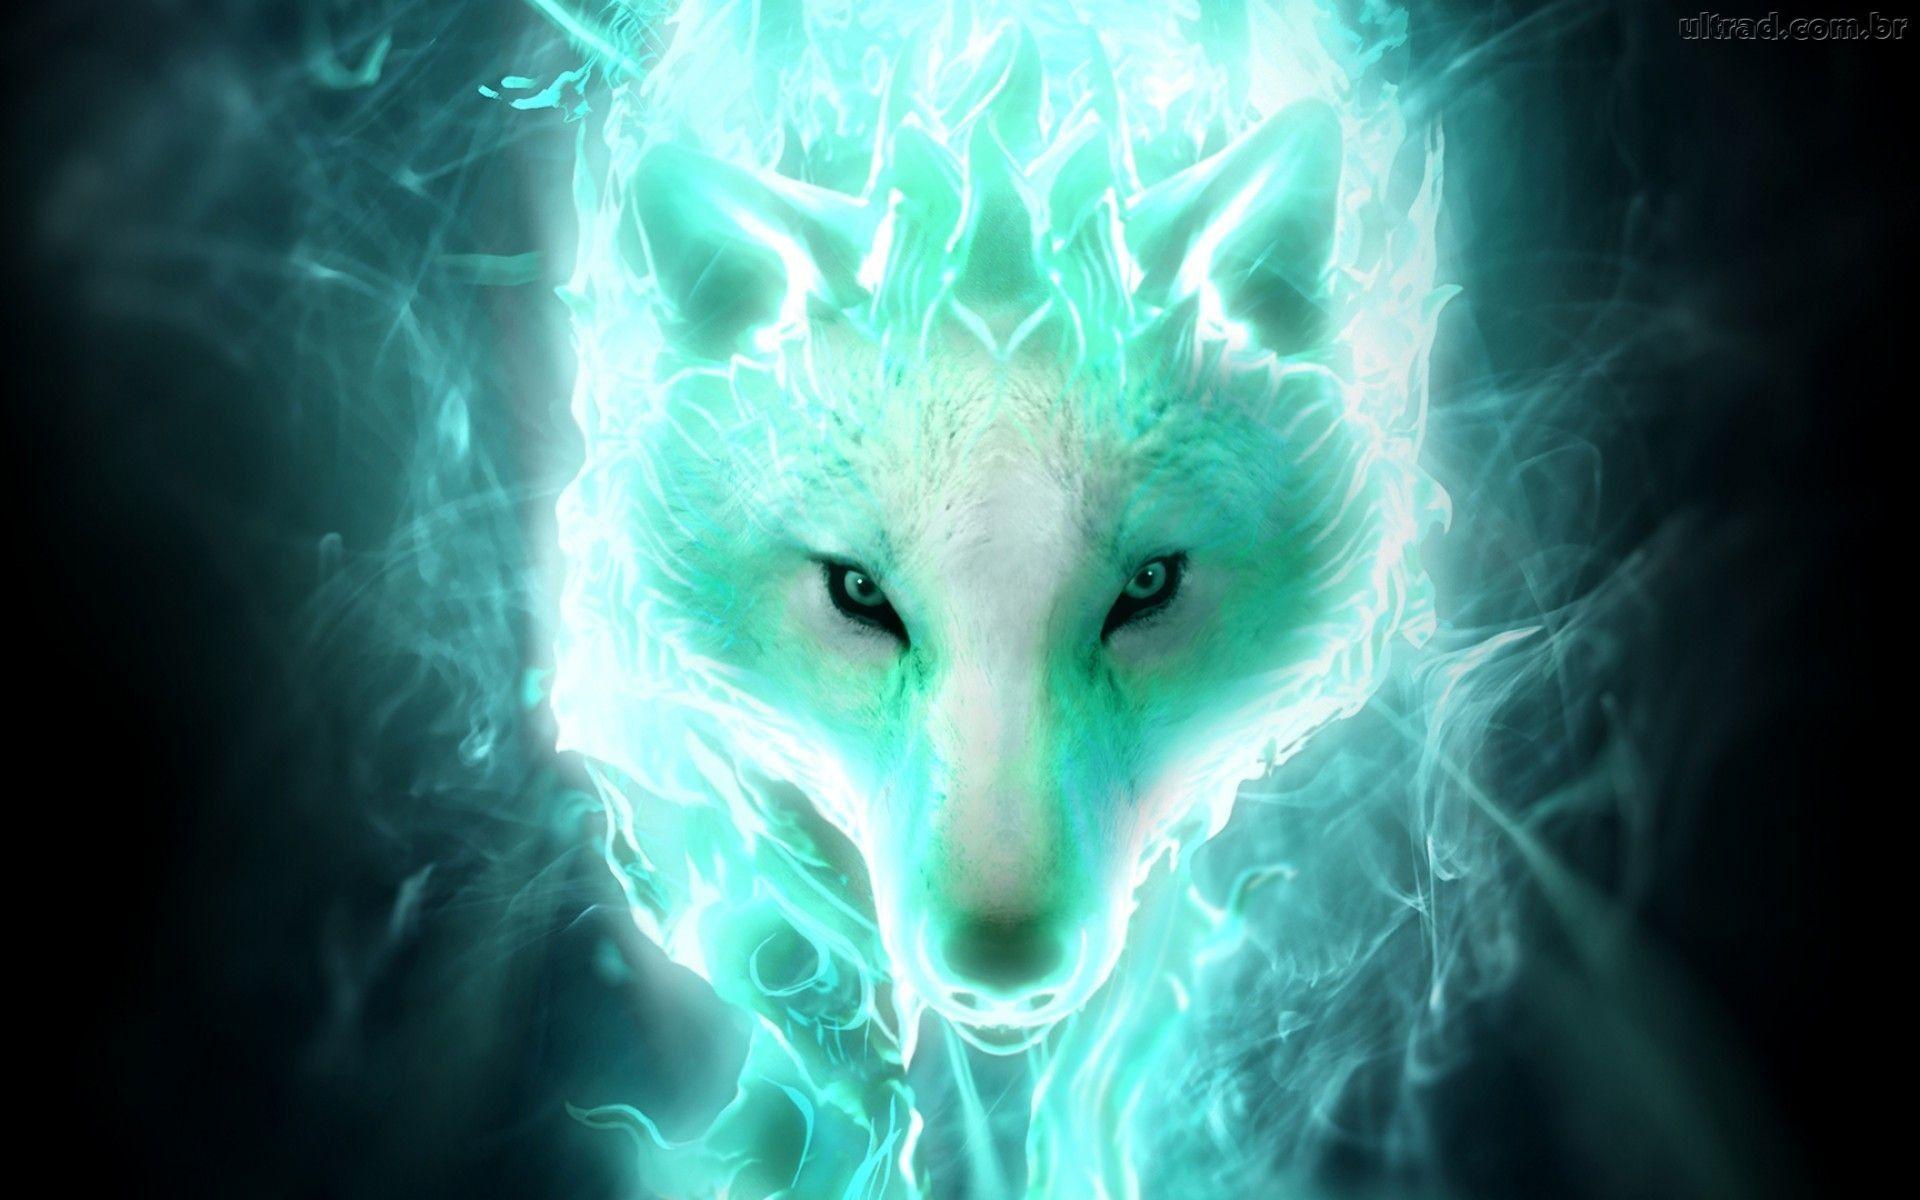 Ice Blue Flame Cool Wolf Backgrounds